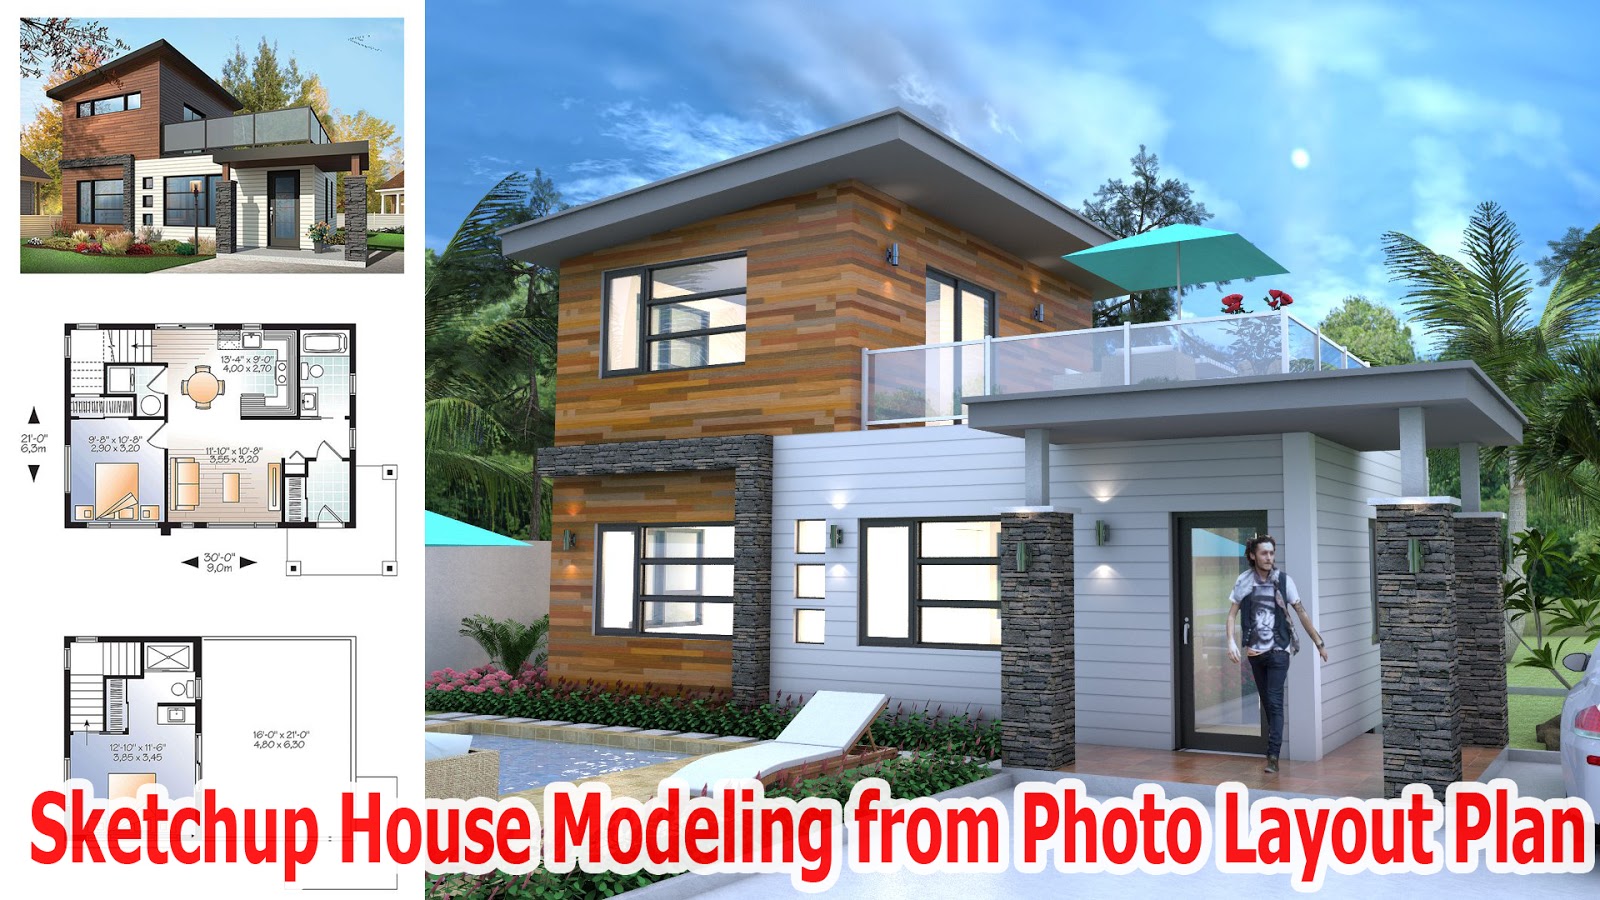 SKETCHUP MODEL  HOUSE  03 Drawing  from photo layout plan  